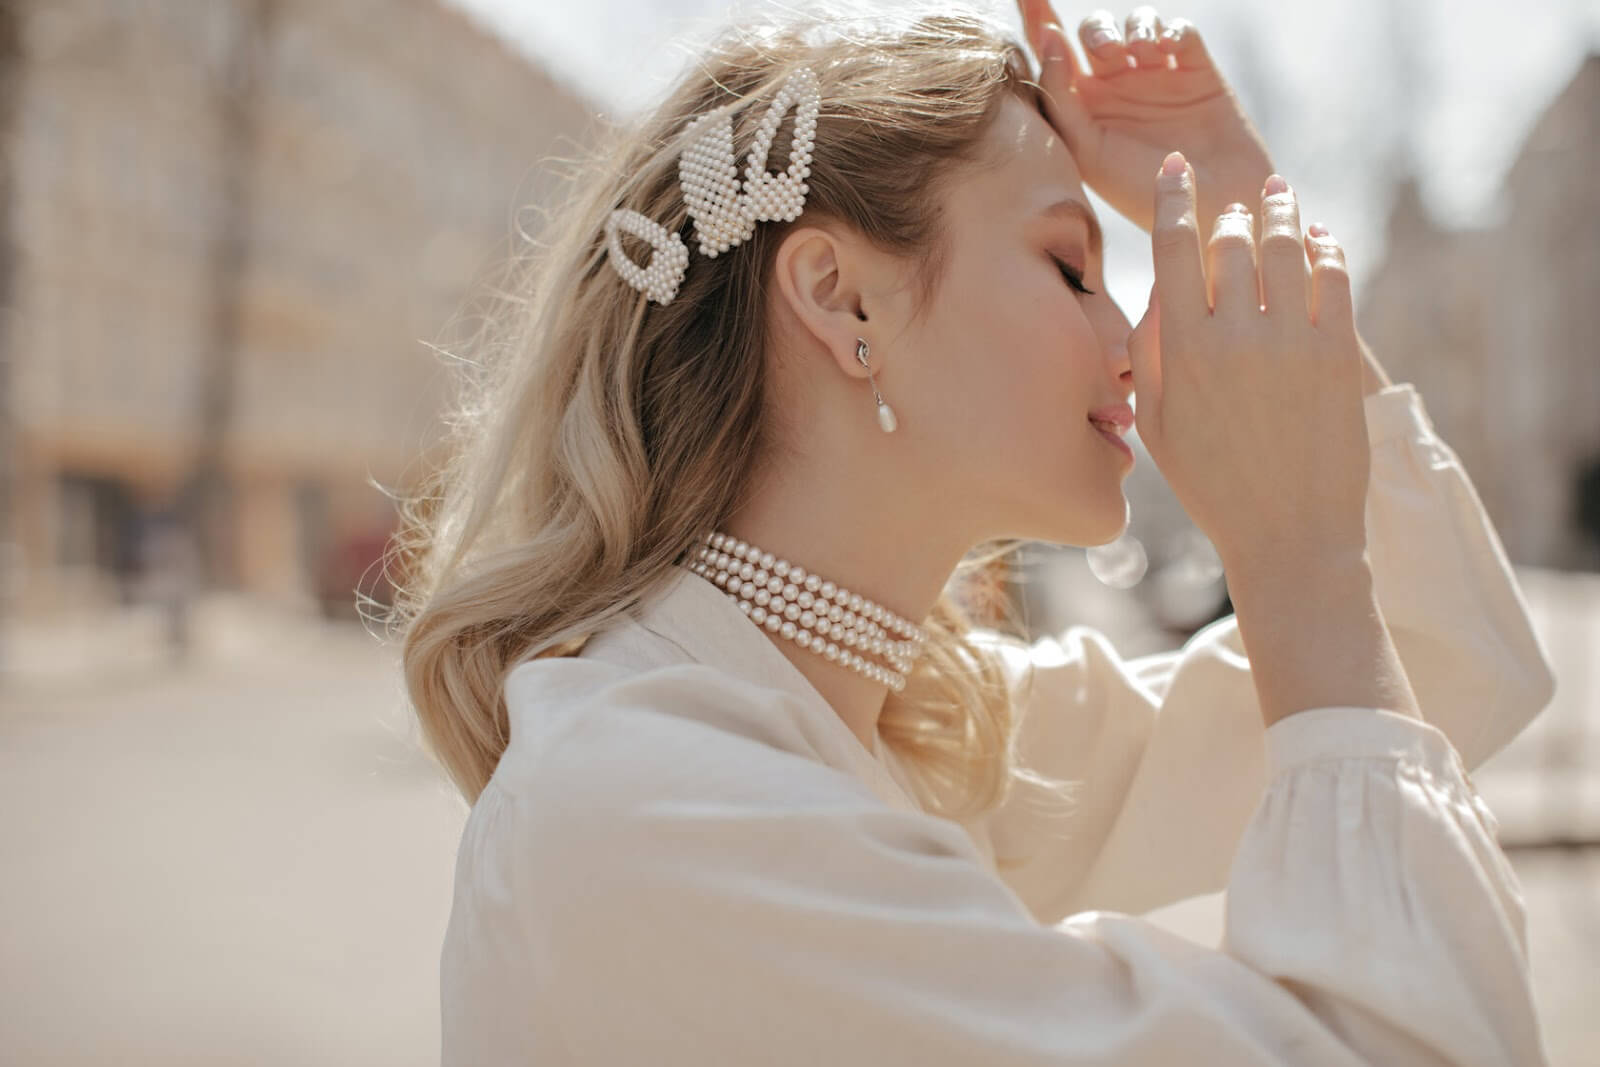 How to Wear Pearls as Your Everyday Jewelry